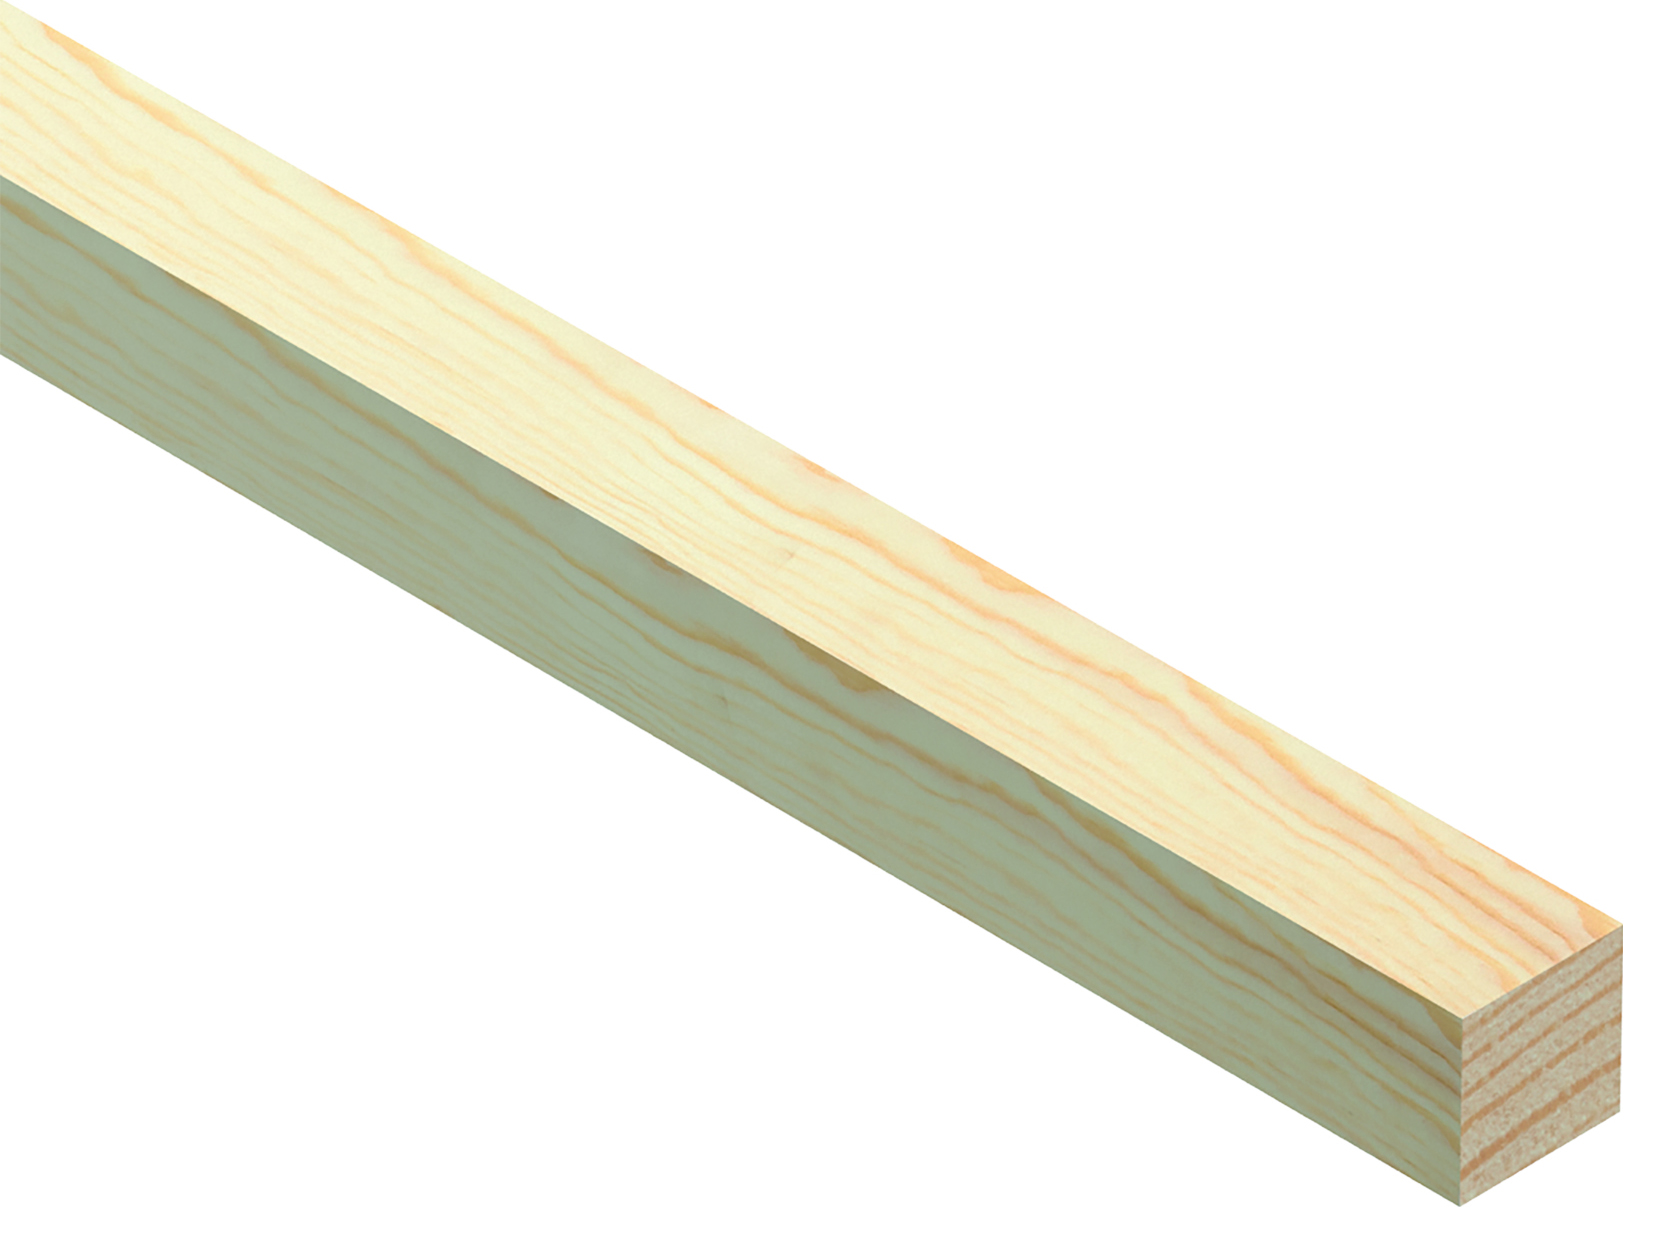 Image of Cheshire Mouldings Pine Stripwood - 12 x 12 x 2400mm